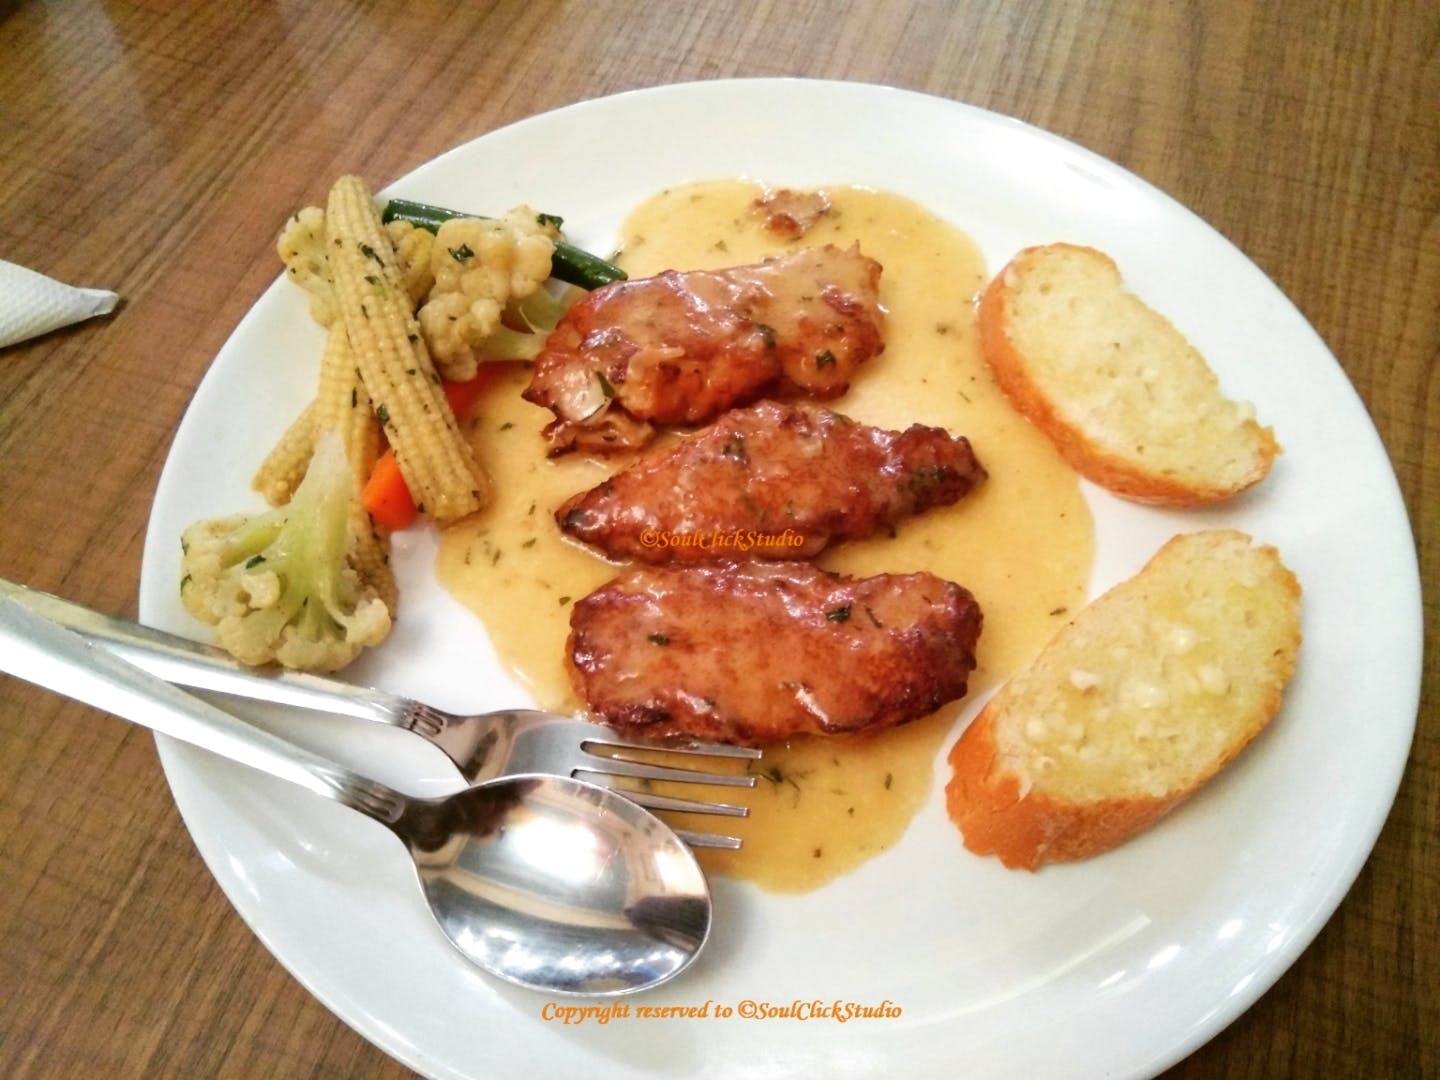 Dish,Food,Cuisine,Ingredient,Meal,Meat,Fried food,Produce,Potato wedges,Staple food